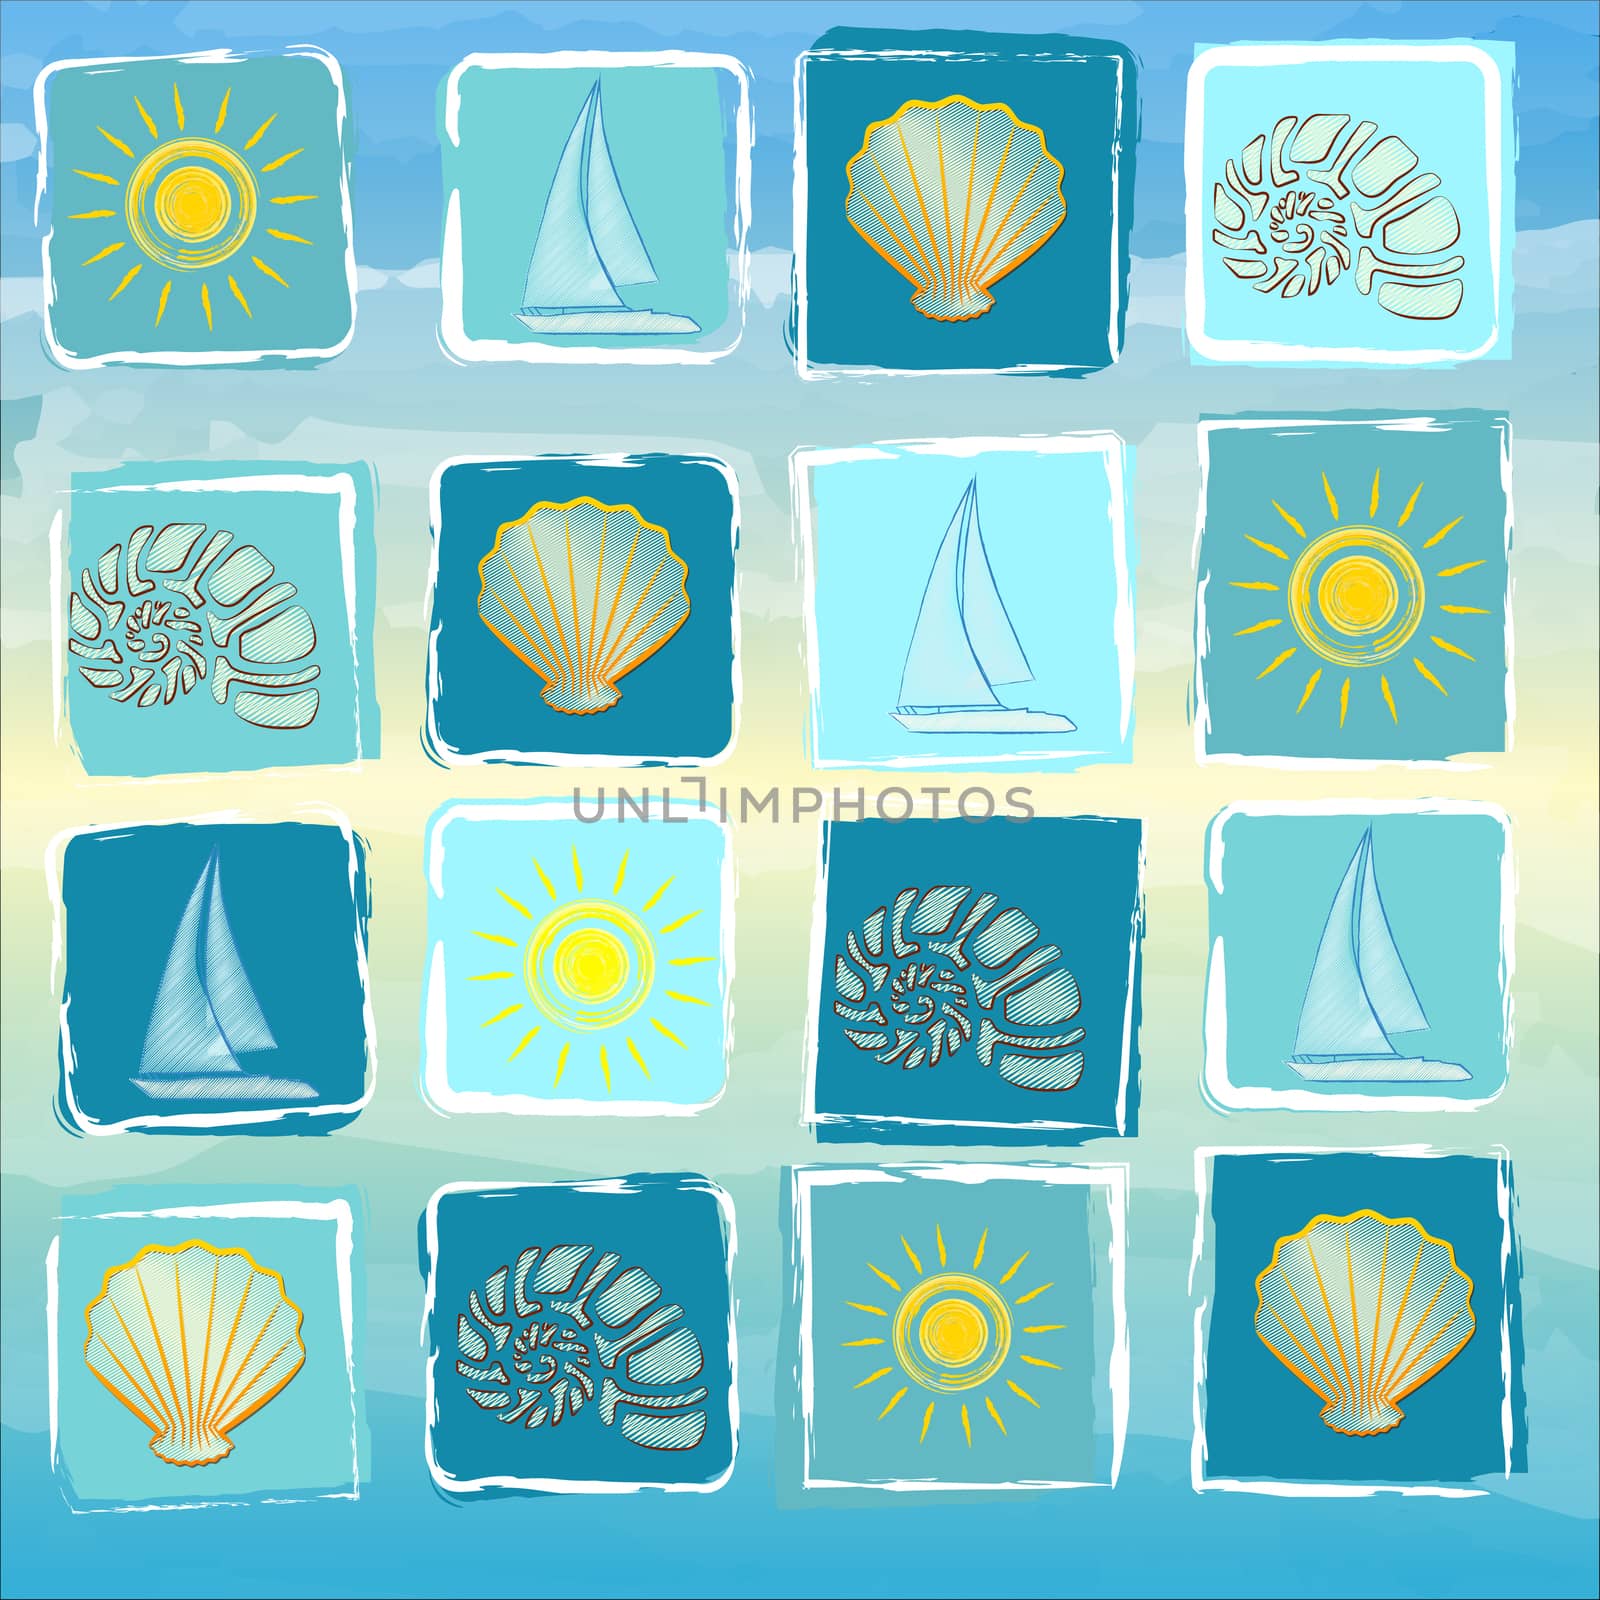 summer background with suns, boats, shells and conchs in squares by marinini